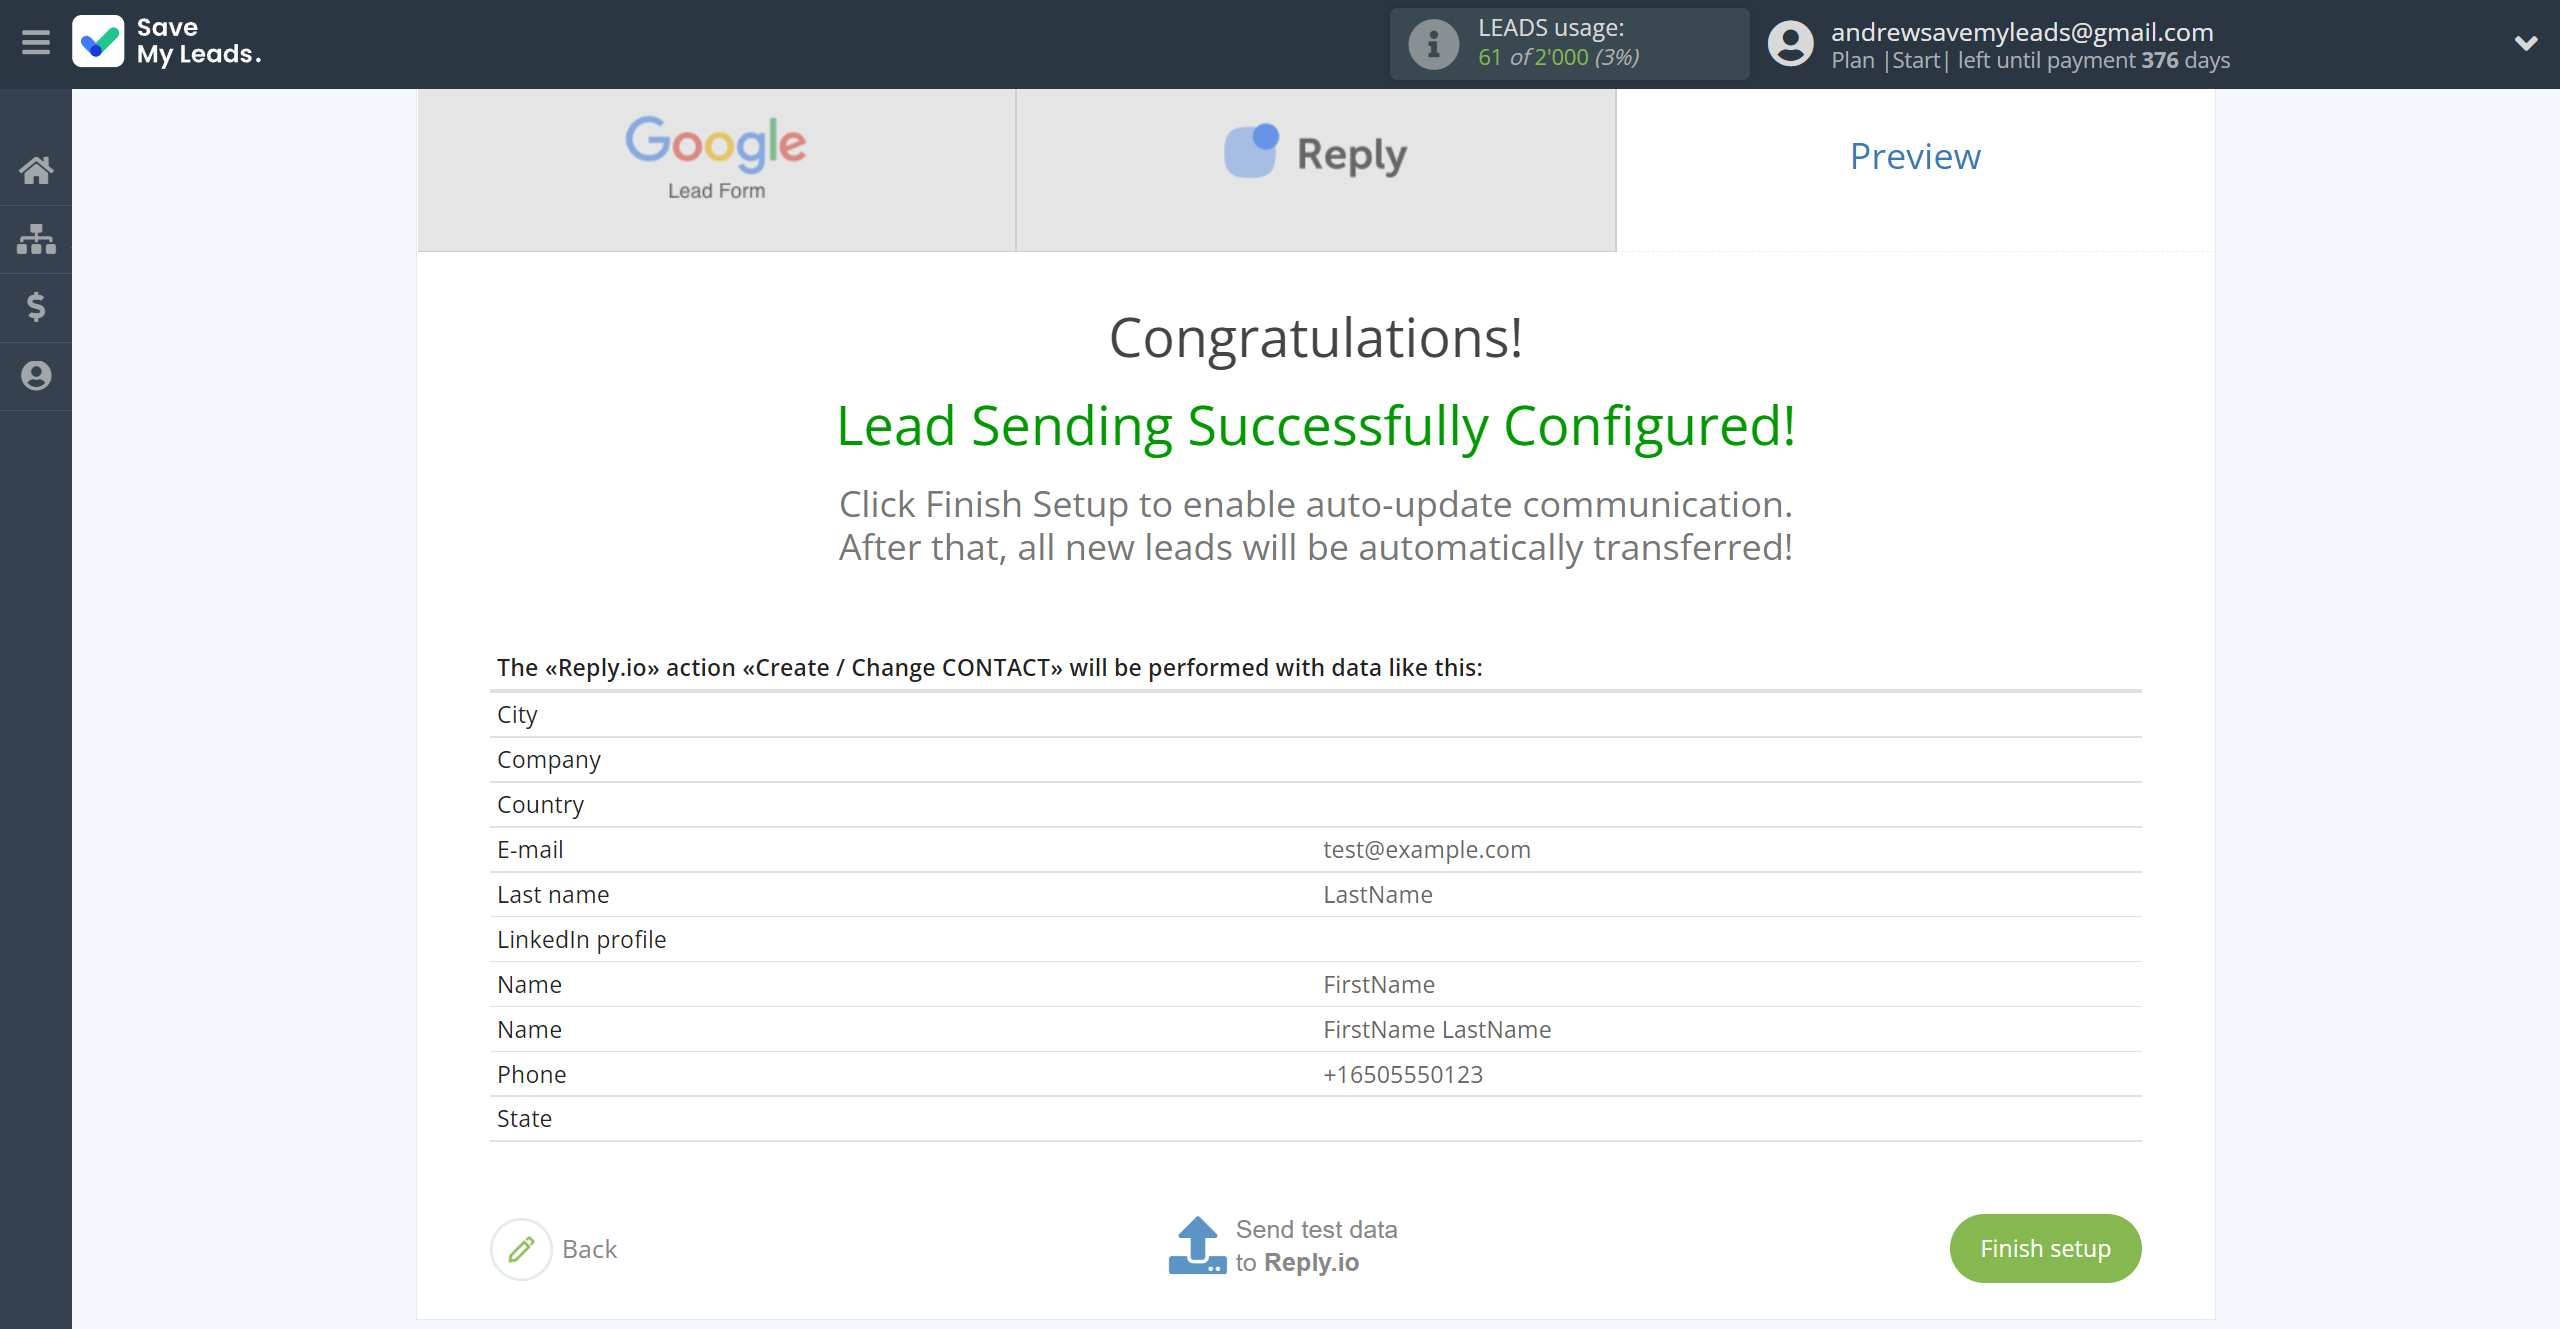 How to Connect Google Lead Form with Reply.io | Test data